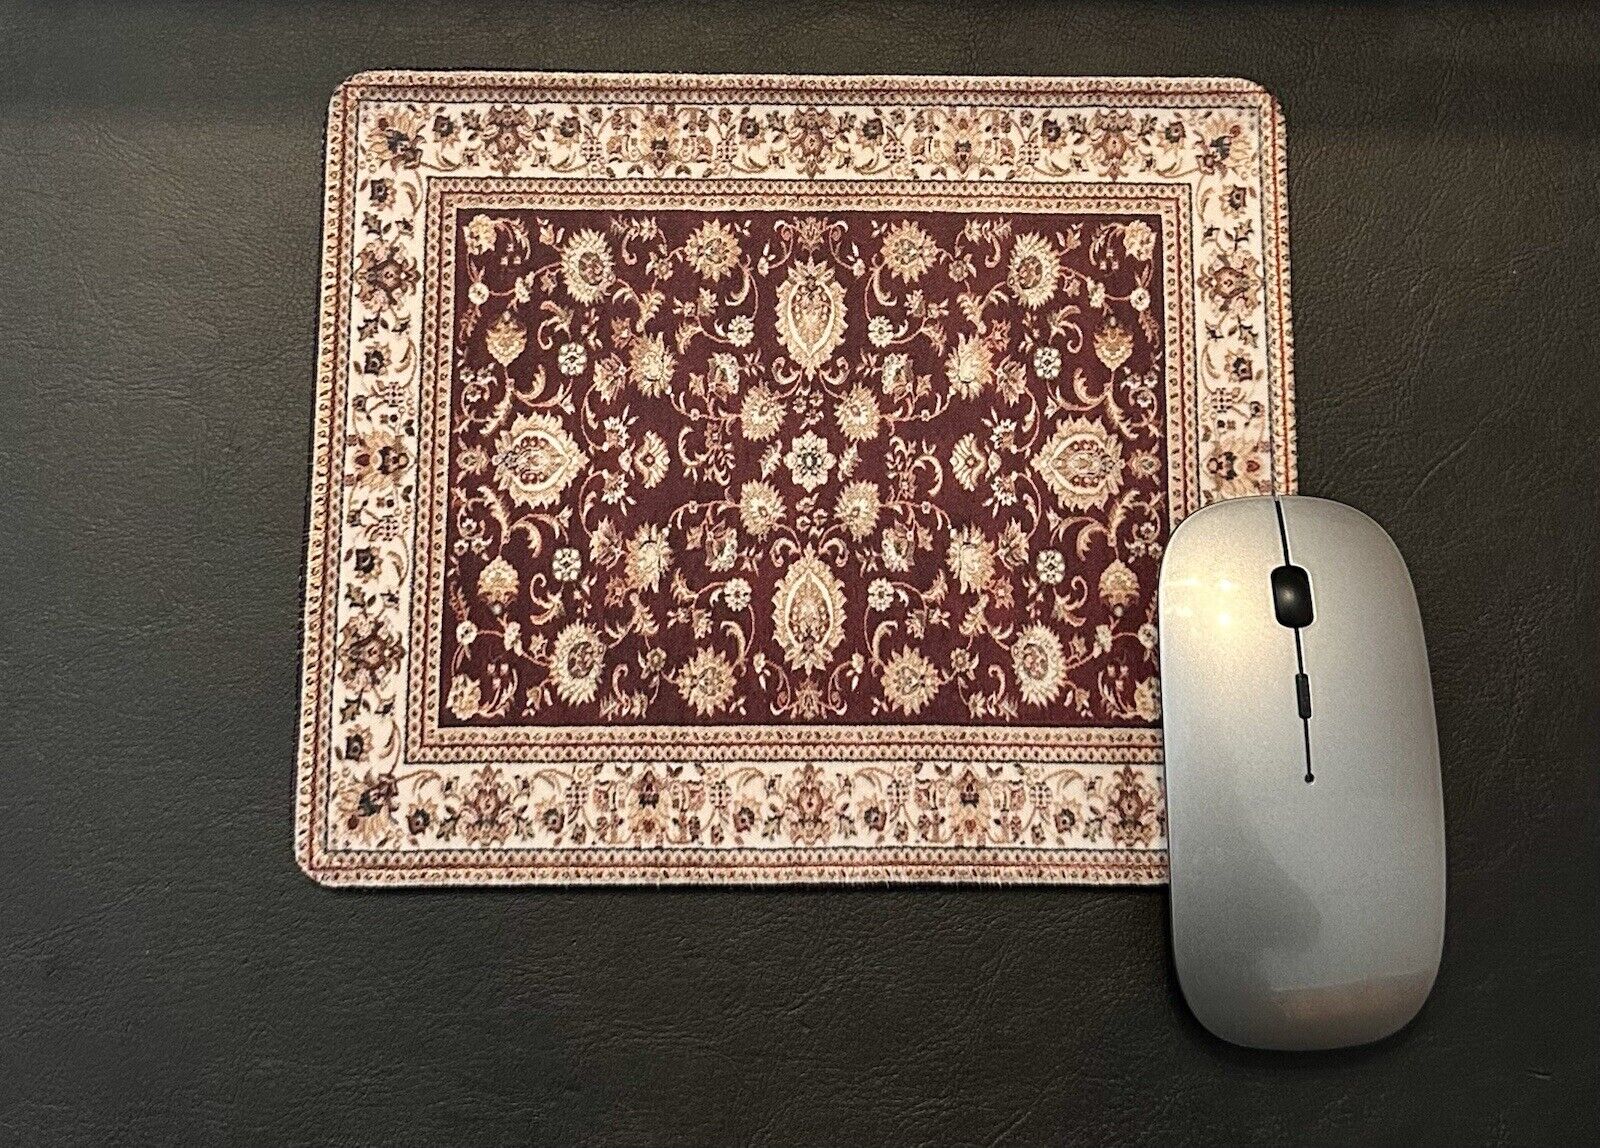 Oriental, Persian, Turkish Carpet Rug Computer Office Desk Mouse Pad, Red, Beige